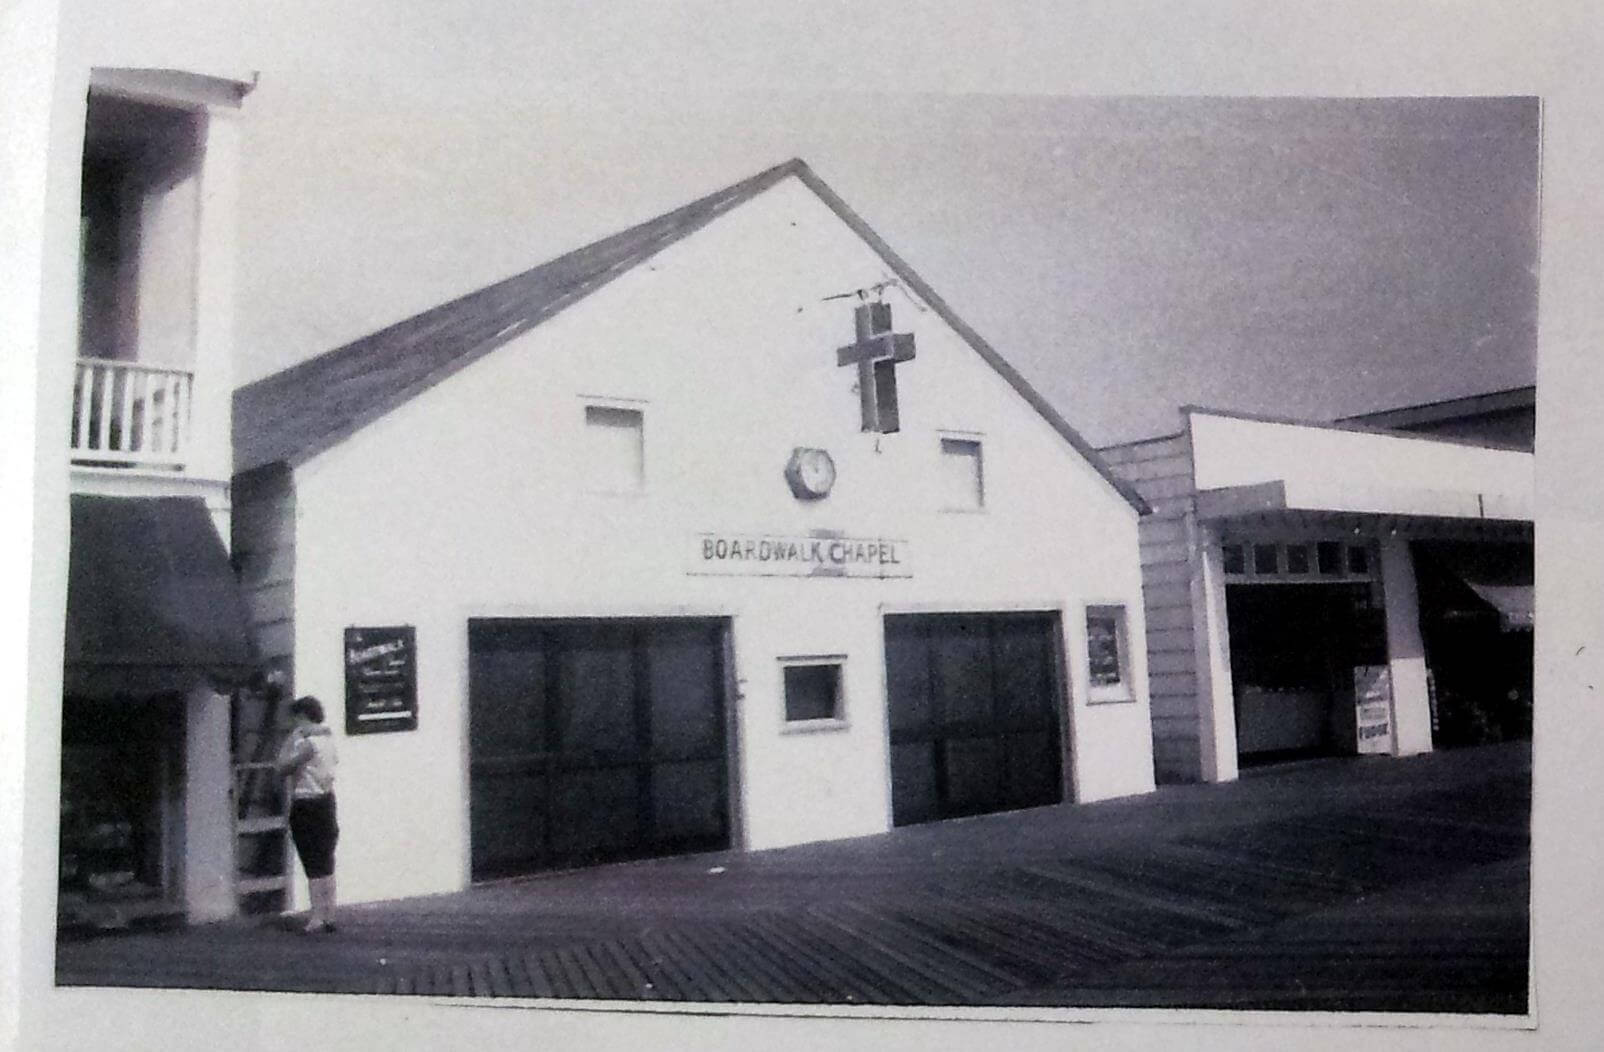 The Boardwalk Chapel still stands on the lot purchased in 1944.